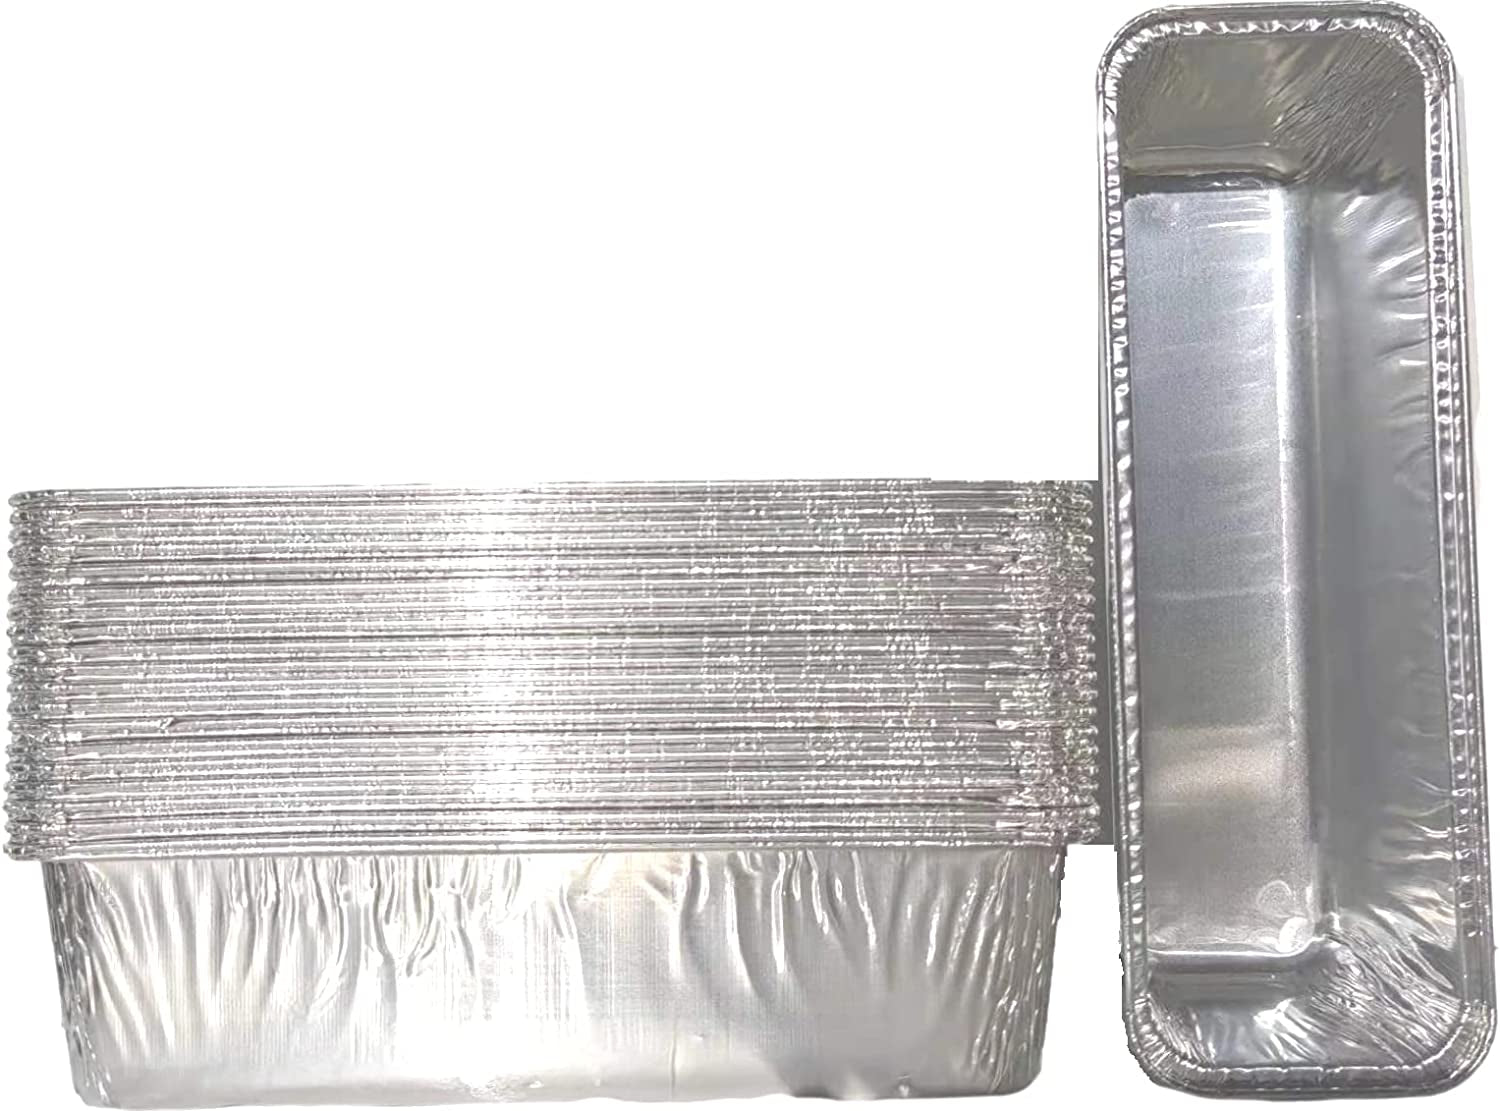 Firsgrill, Firsgrill Professional Grease Liners Disposable Aluminum Foil Drip Pans for Camp Chef Portable Grill (12)